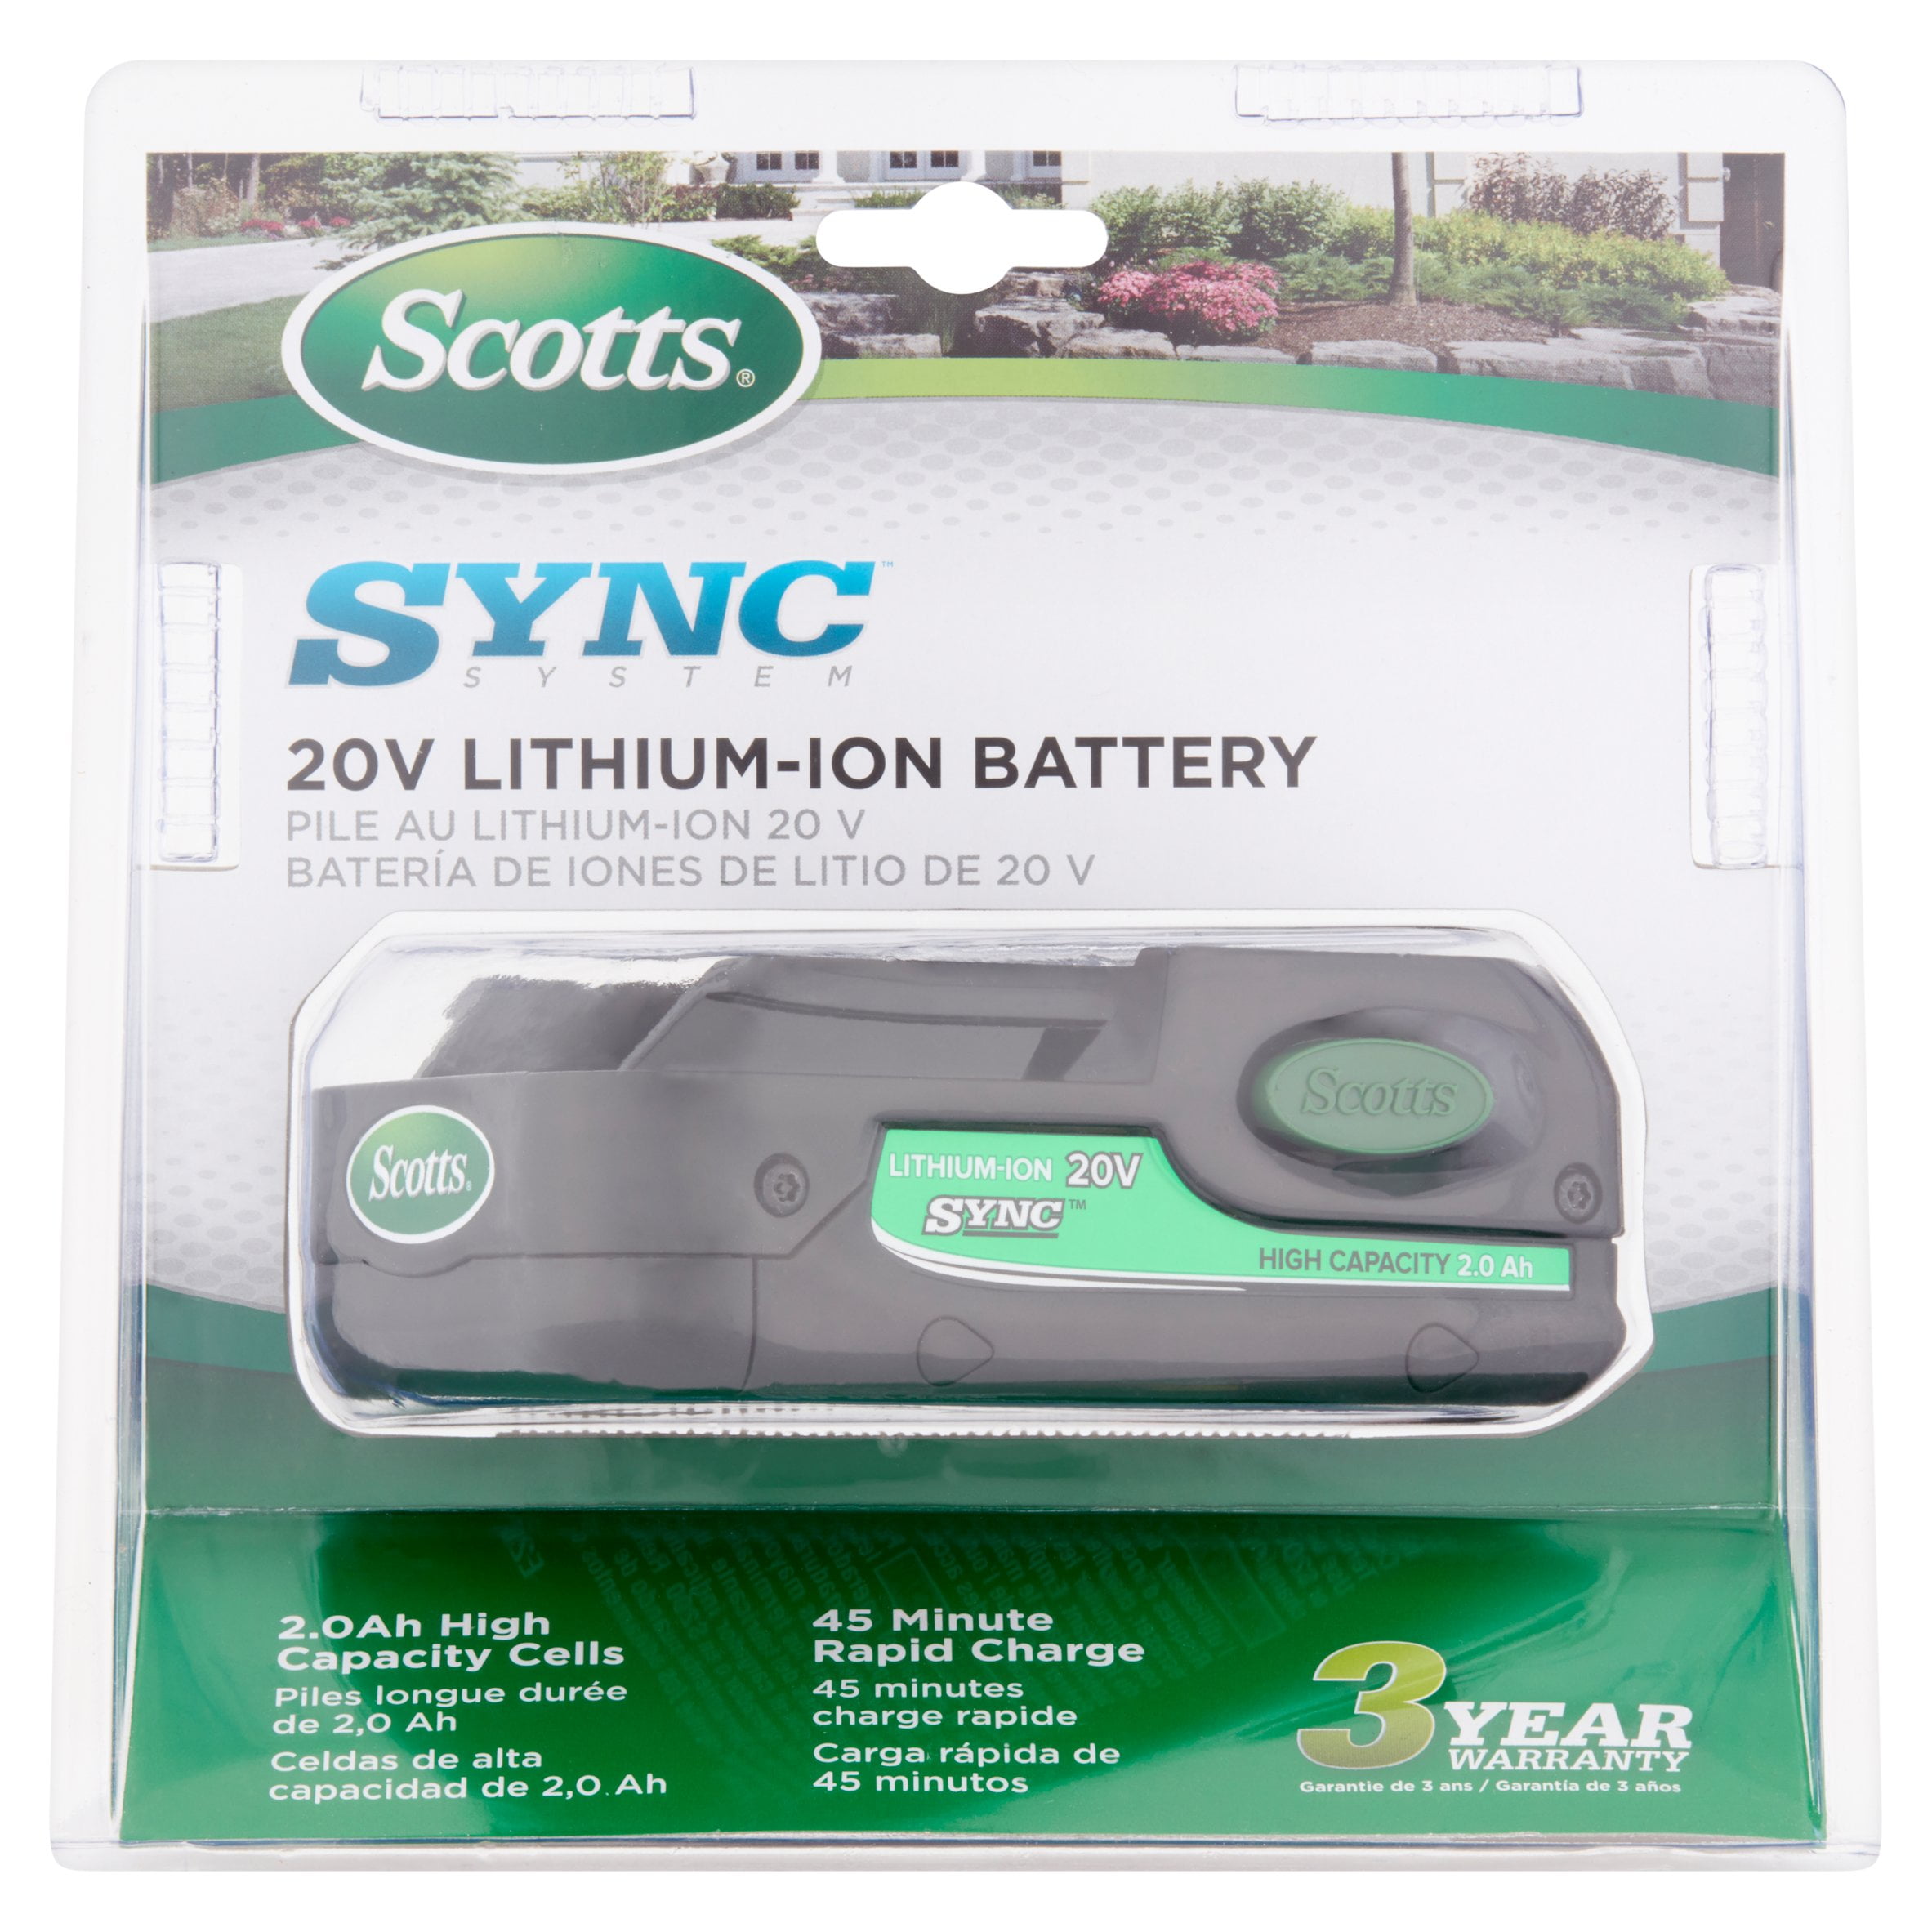 scotts weed eater battery